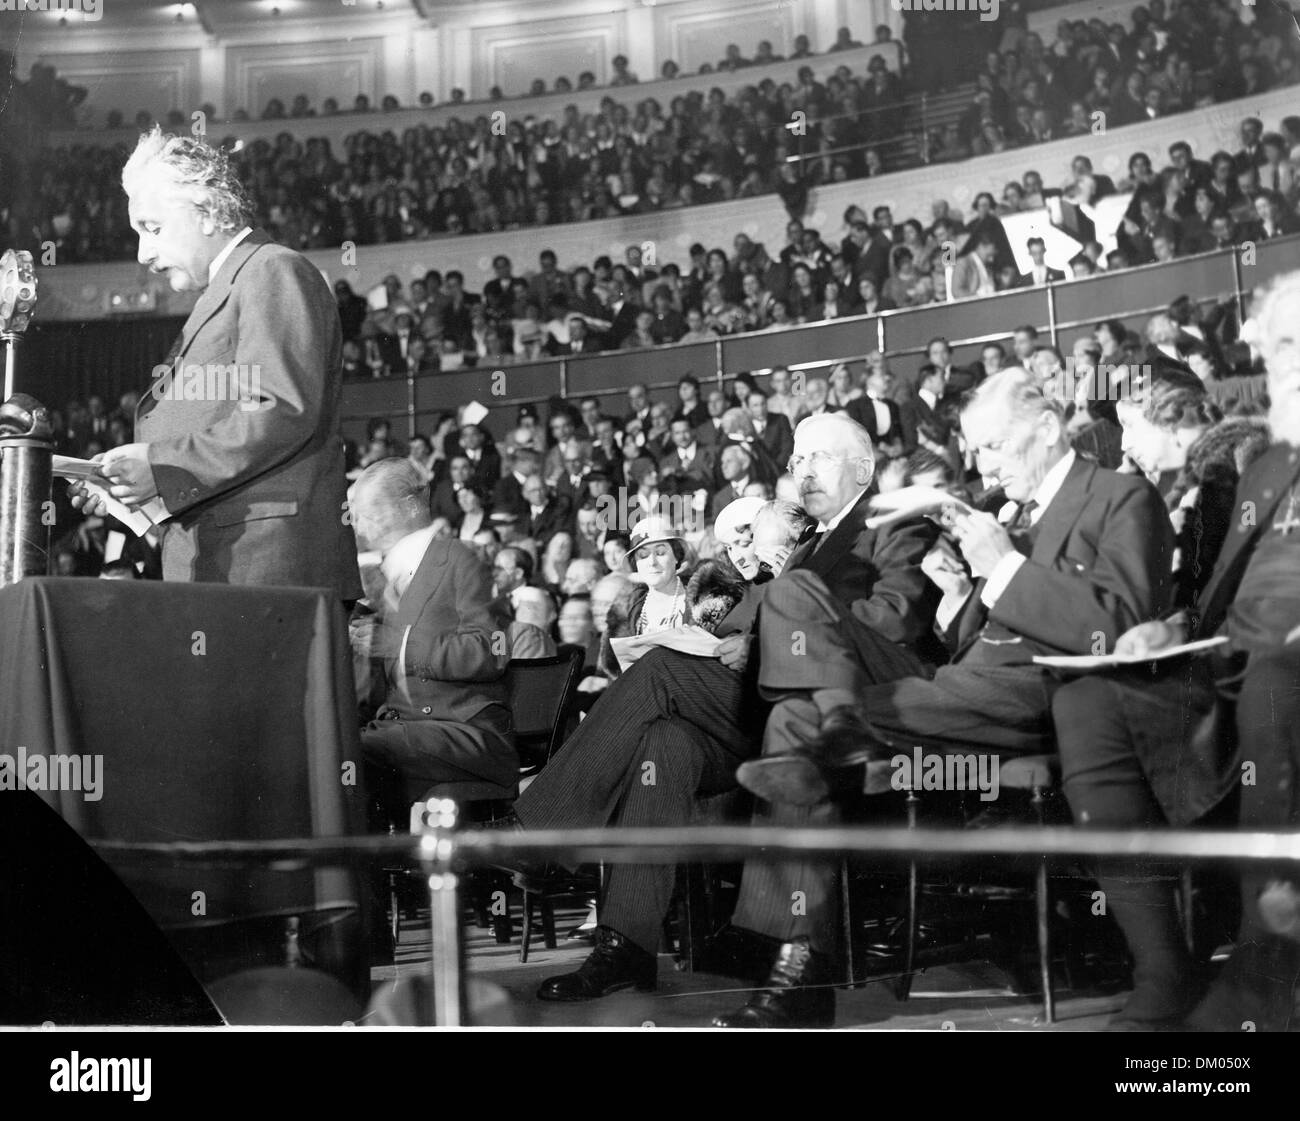 June 17, 1933 - London, England, U.K. - Professor ALBERT EINSTEIN during his 'Science and Civilisation' lecture at the Royal Albert hall with LORD RUTHERFORD, and SIR AUSTEN CHAMBERLAIN seated behind him. Einstein (March 14, 1879 Ð April 18, 1955) was a German theoretical physicist regarded as the greatest scientist of the 20th century. He proposed the theory of relativity and made Stock Photo